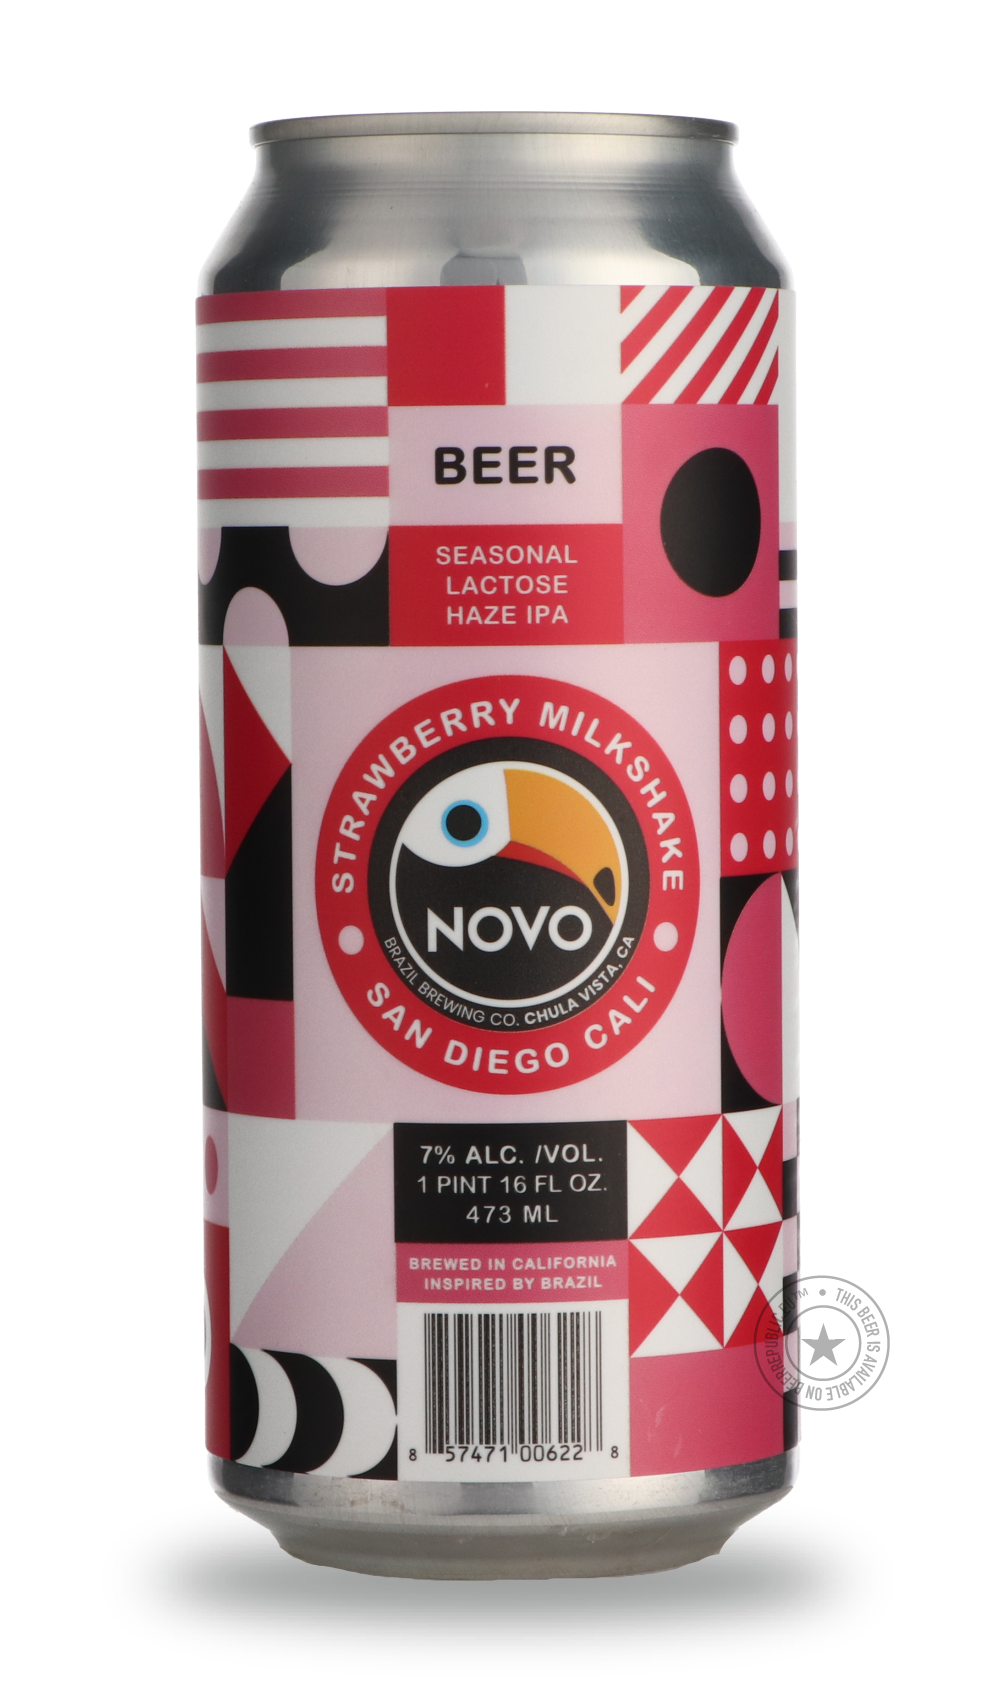 -Novo Brazil- Strawberry Shake-IPA- Only @ Beer Republic - The best online beer store for American & Canadian craft beer - Buy beer online from the USA and Canada - Bier online kopen - Amerikaans bier kopen - Craft beer store - Craft beer kopen - Amerikanisch bier kaufen - Bier online kaufen - Acheter biere online - IPA - Stout - Porter - New England IPA - Hazy IPA - Imperial Stout - Barrel Aged - Barrel Aged Imperial Stout - Brown - Dark beer - Blond - Blonde - Pilsner - Lager - Wheat - Weizen - Amber - Ba